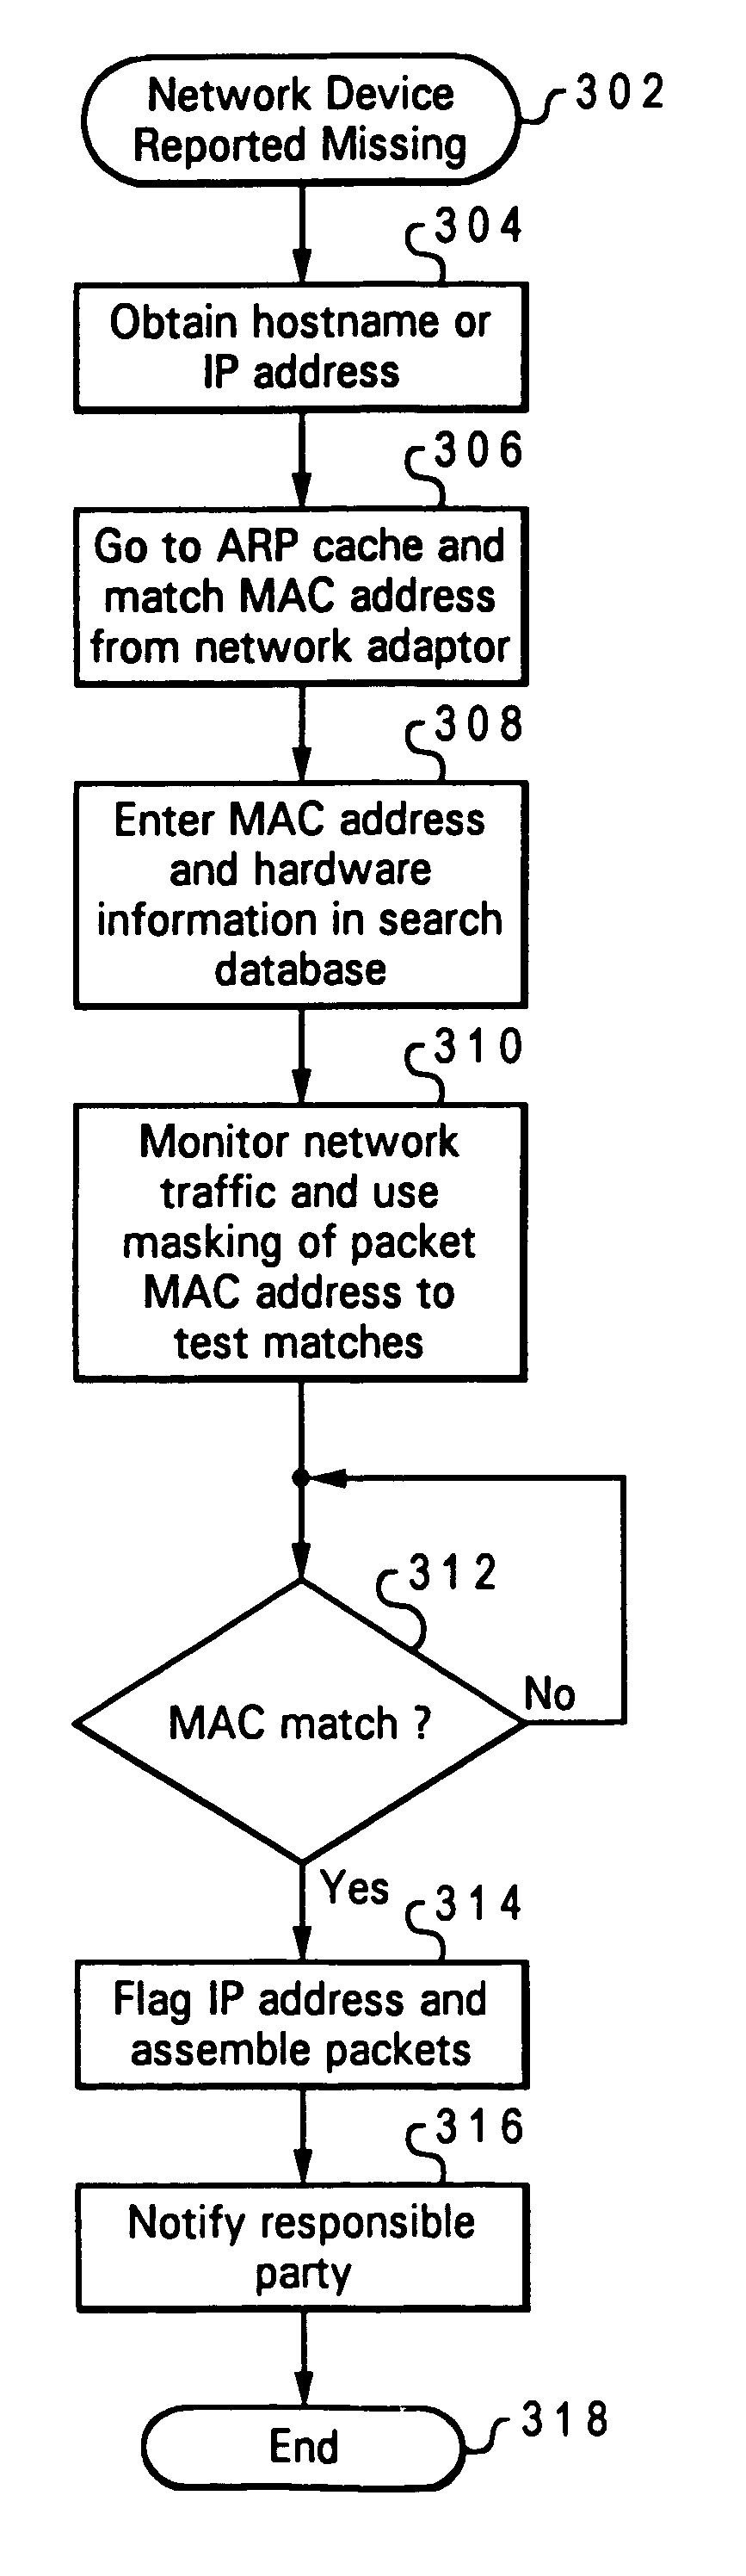 Method and system for tracing missing network devices using hardware fingerprints